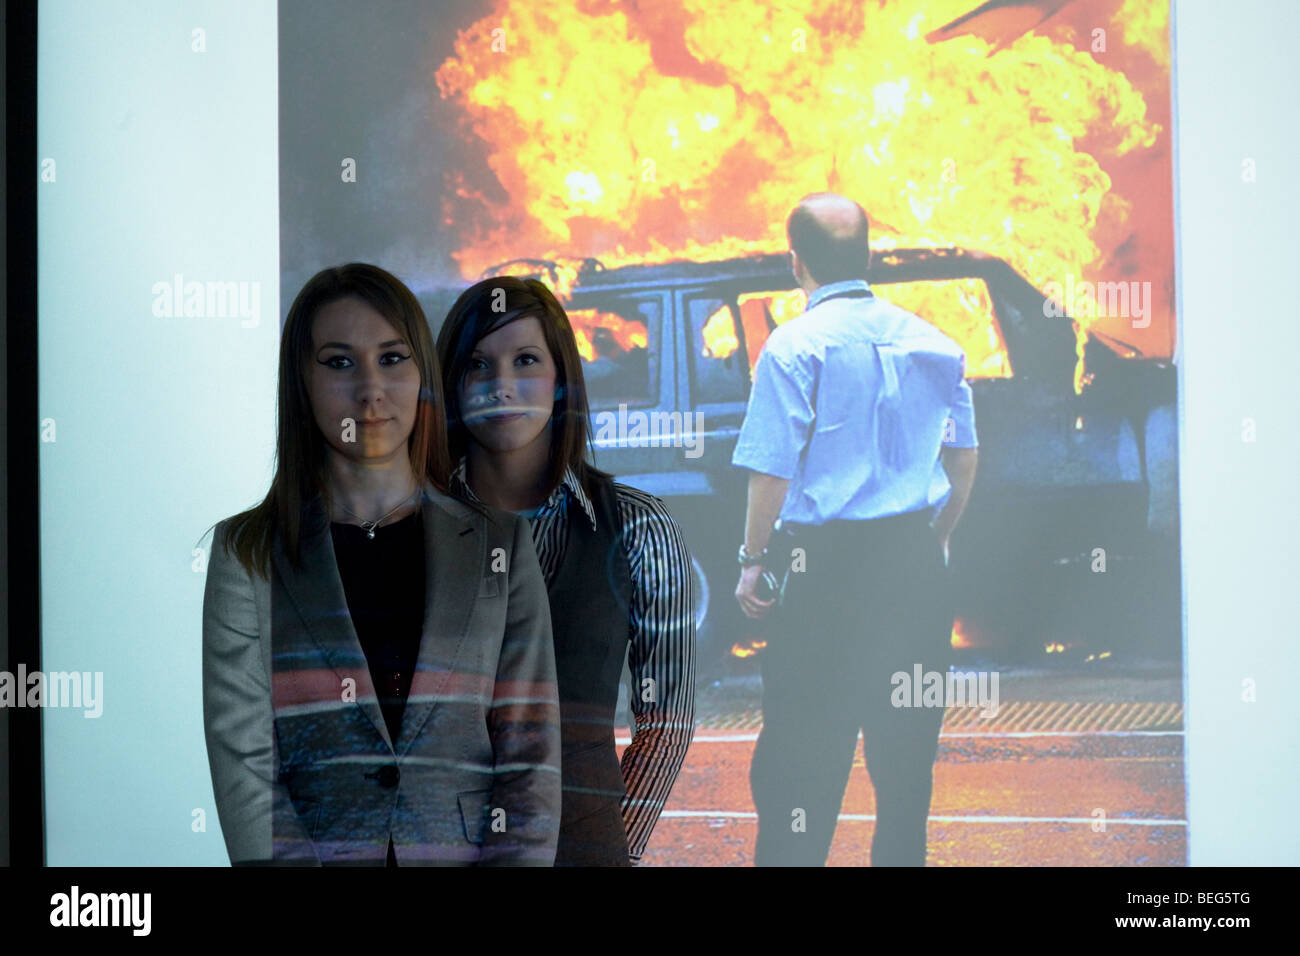 Two female BAA security instructors stand in front of a Powerpoint image showing the Glasgow airport terrorist attack. Stock Photo